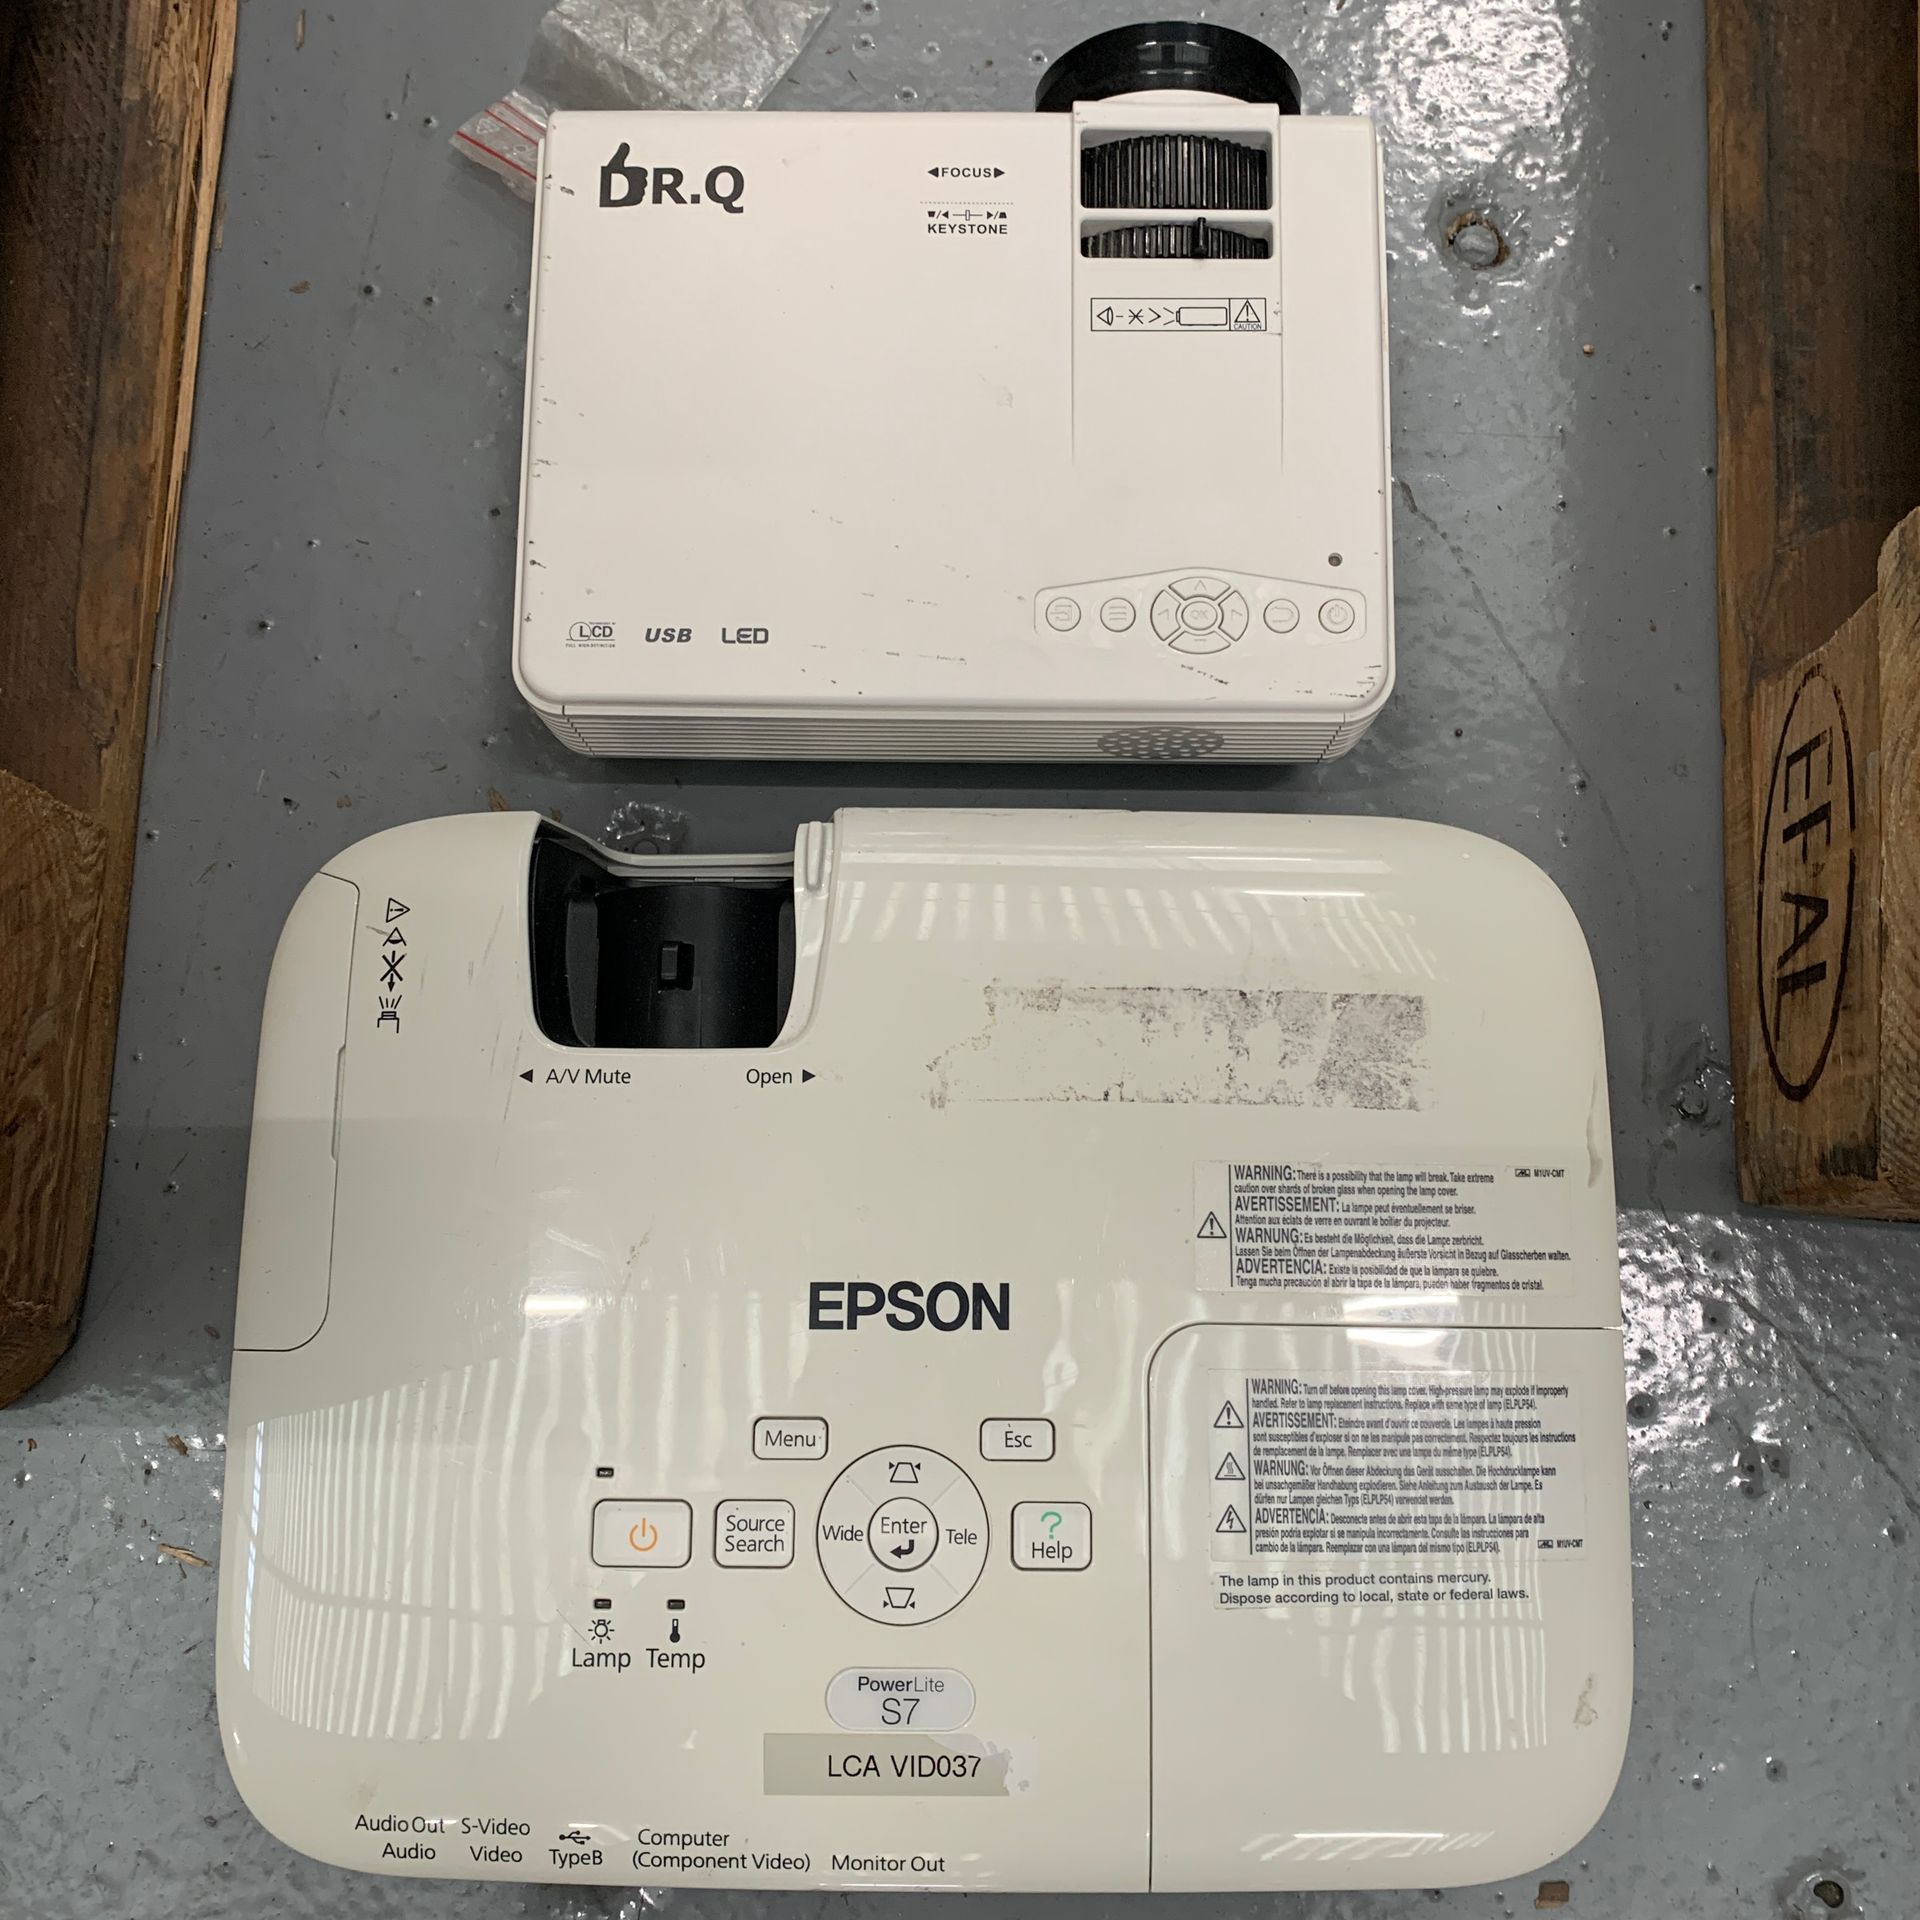 Null Lot of 2 Used Overhead Projectors : 1 EPSON H328A and 1 DR-Q HI-04